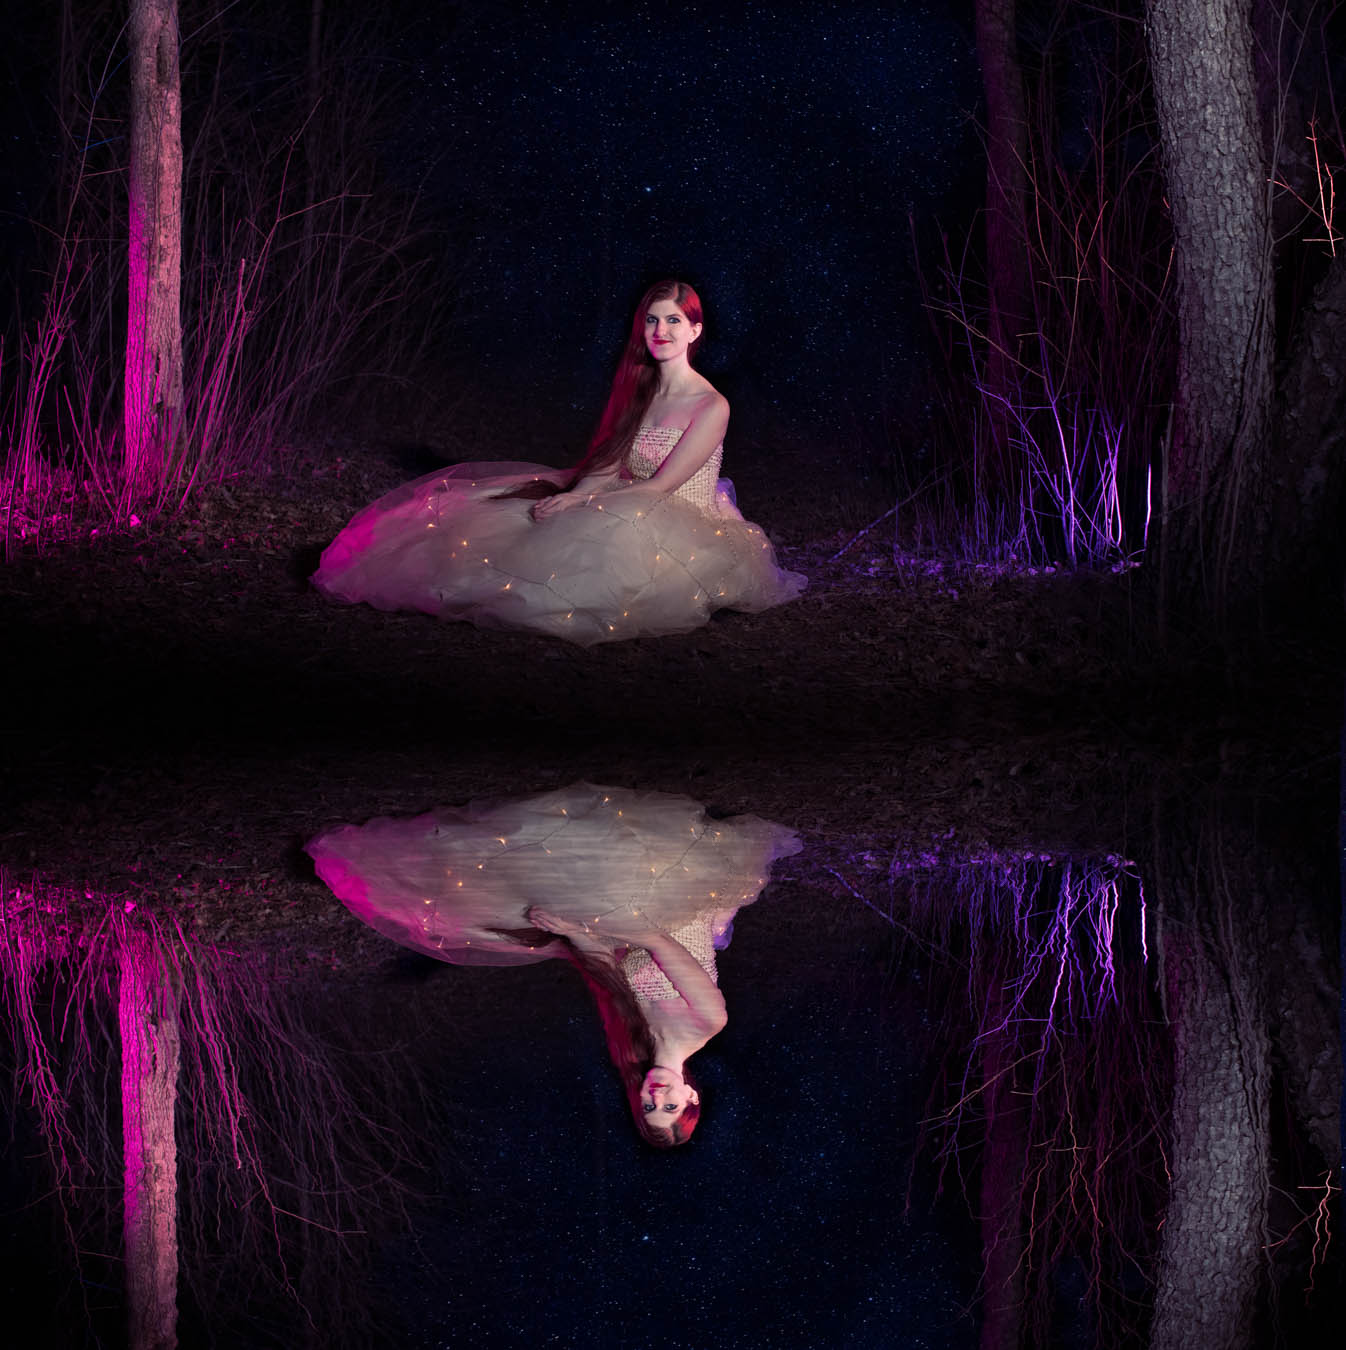 Beautiful model Dreamera Marie poses by a lake at night with a reflection from the water
